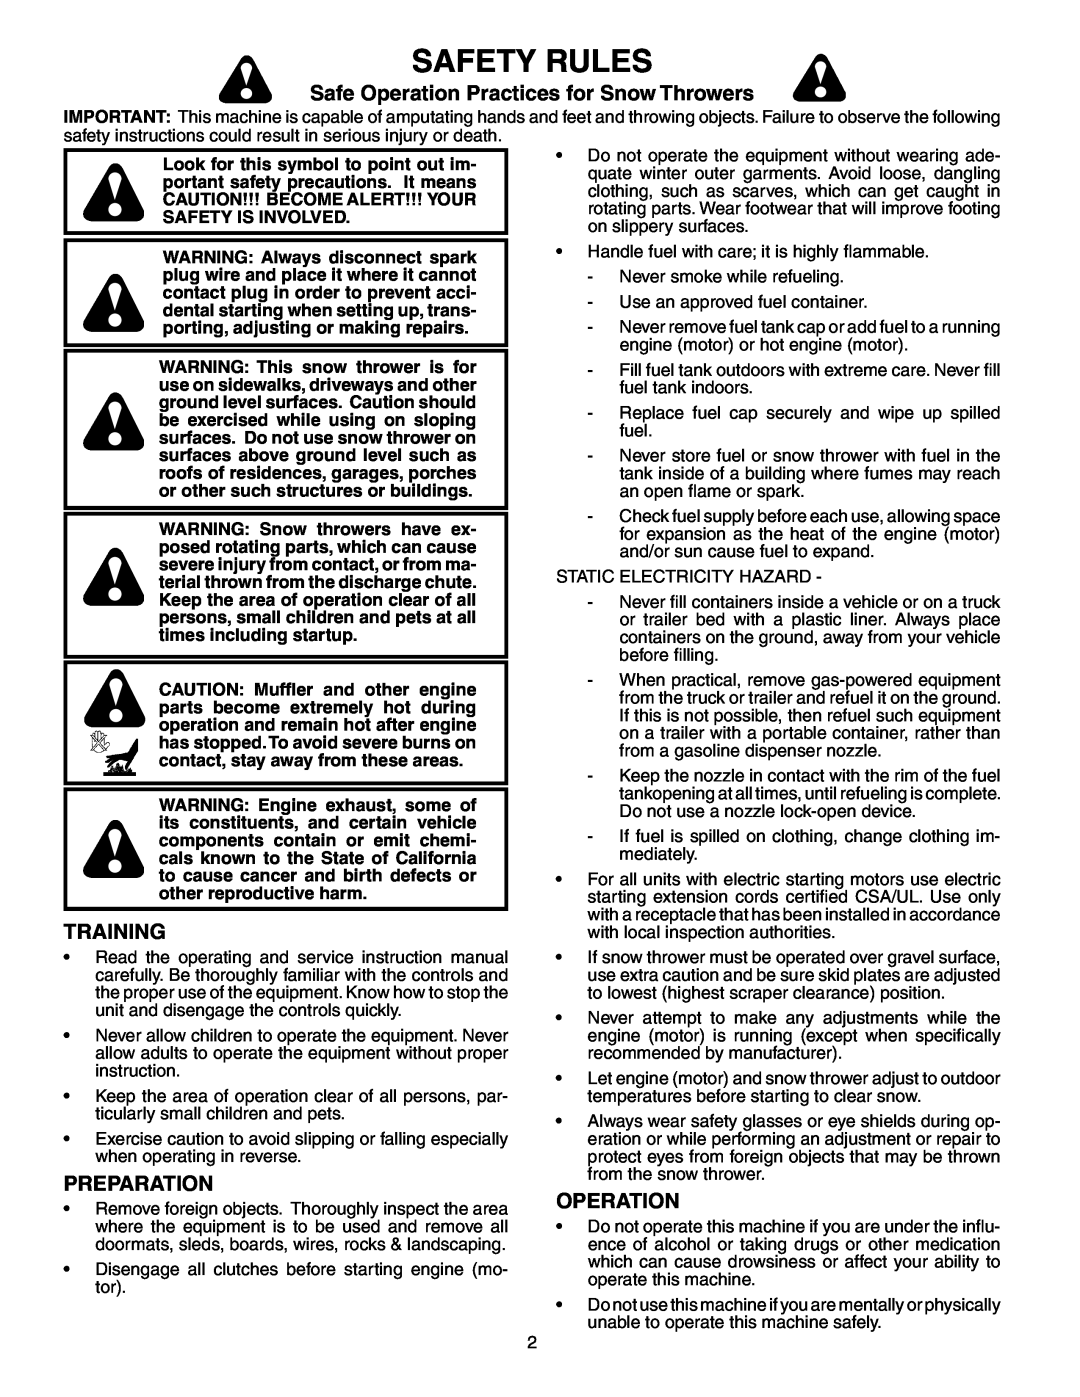 Poulan PP524B owner manual Safety Rules, Safe Operation Practices for Snow Throwers, Training, Preparation 